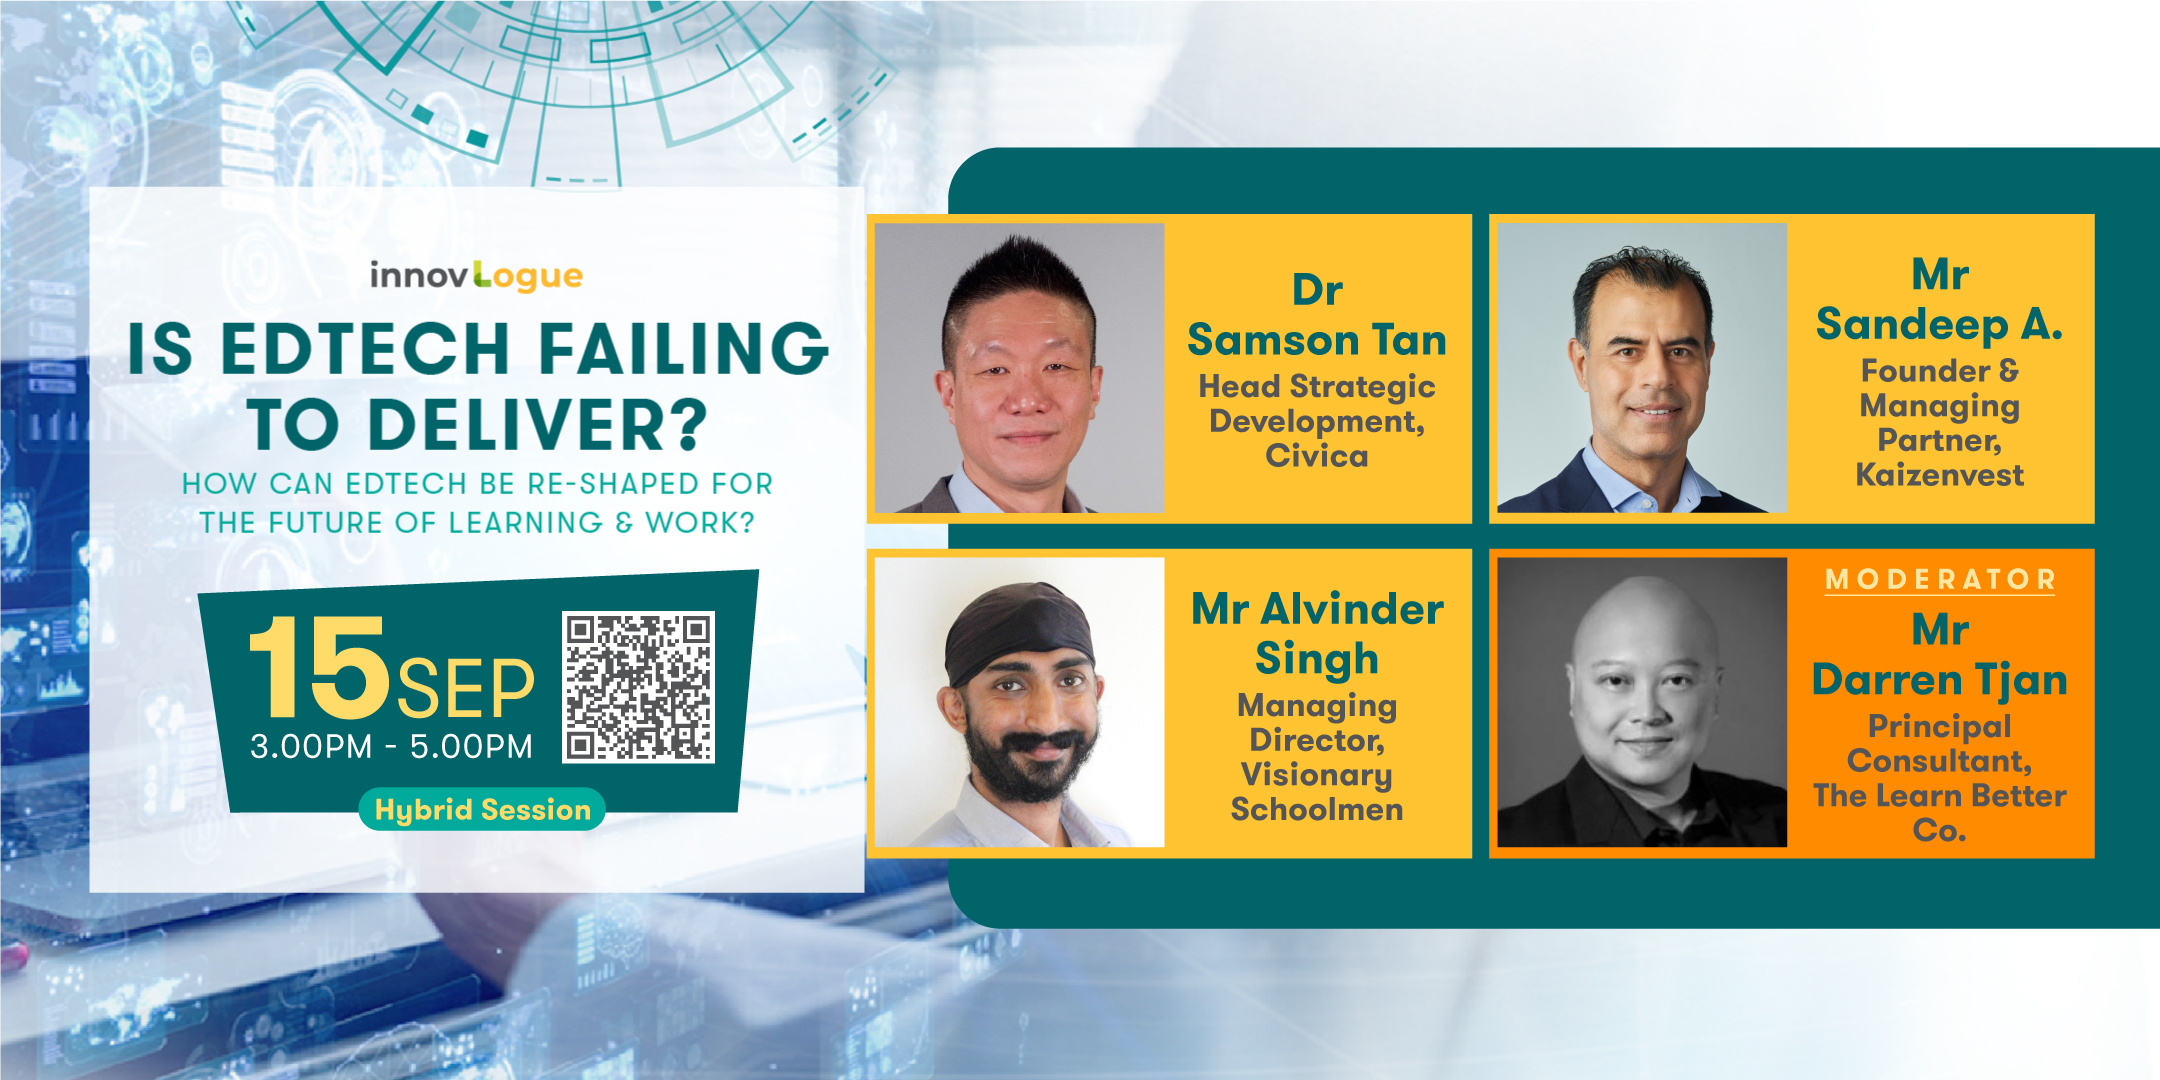 [WEBINAR ON-DEMAND] innovLogue: Is EdTech Failing to Deliver?